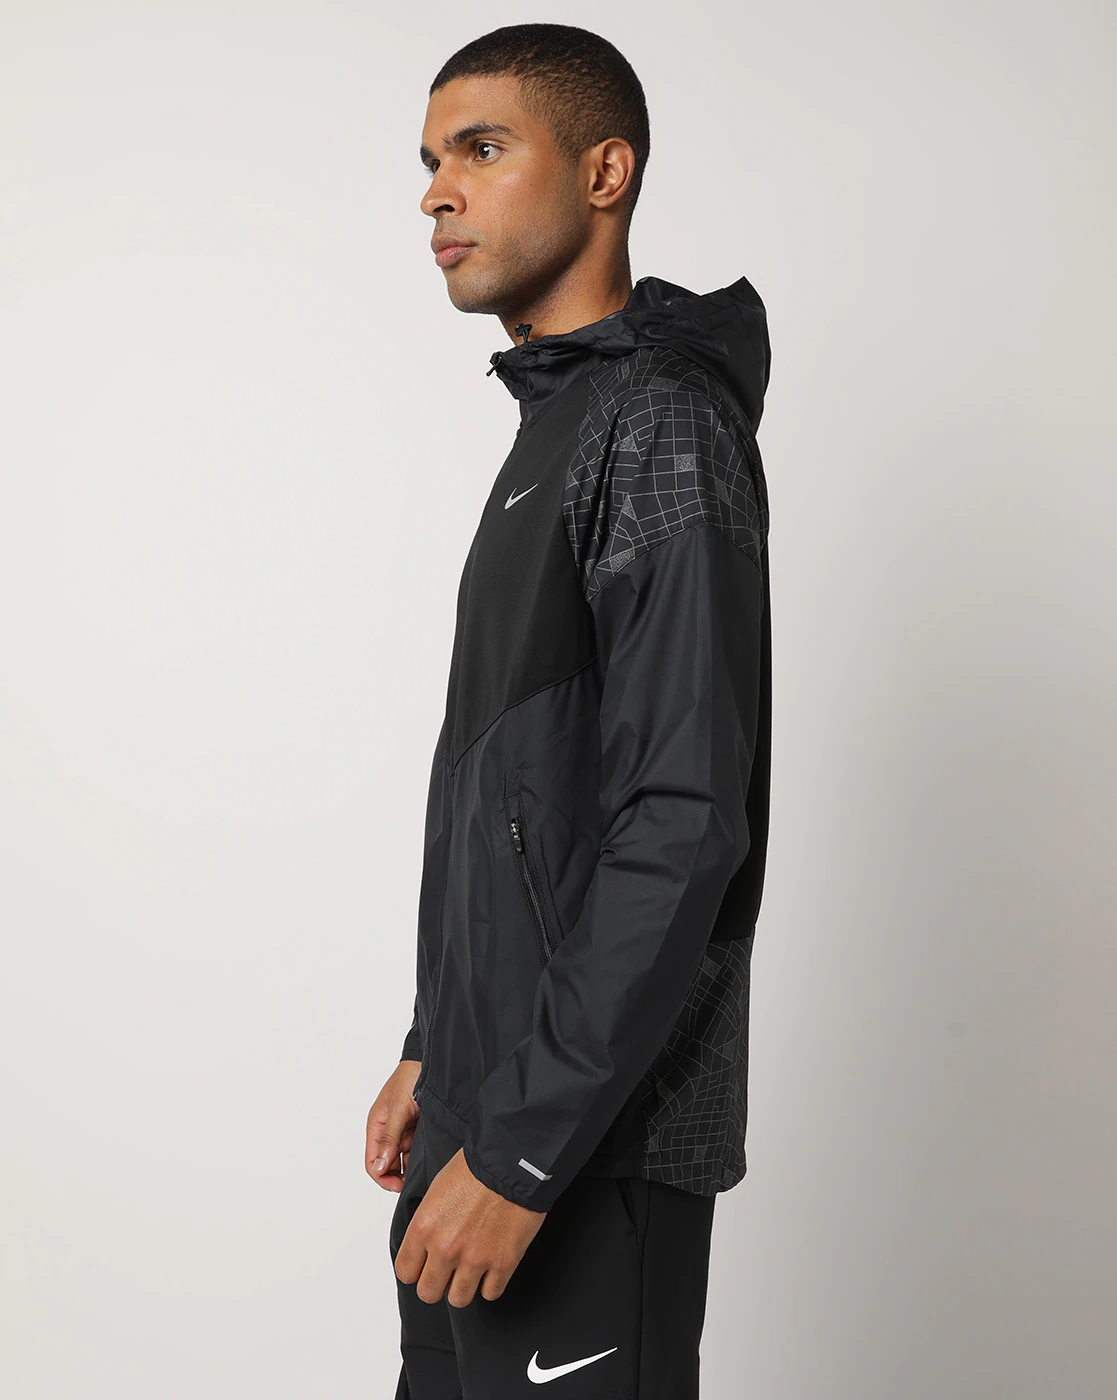 Printed Zip-Front Hooded Jacket-Dq6488-010